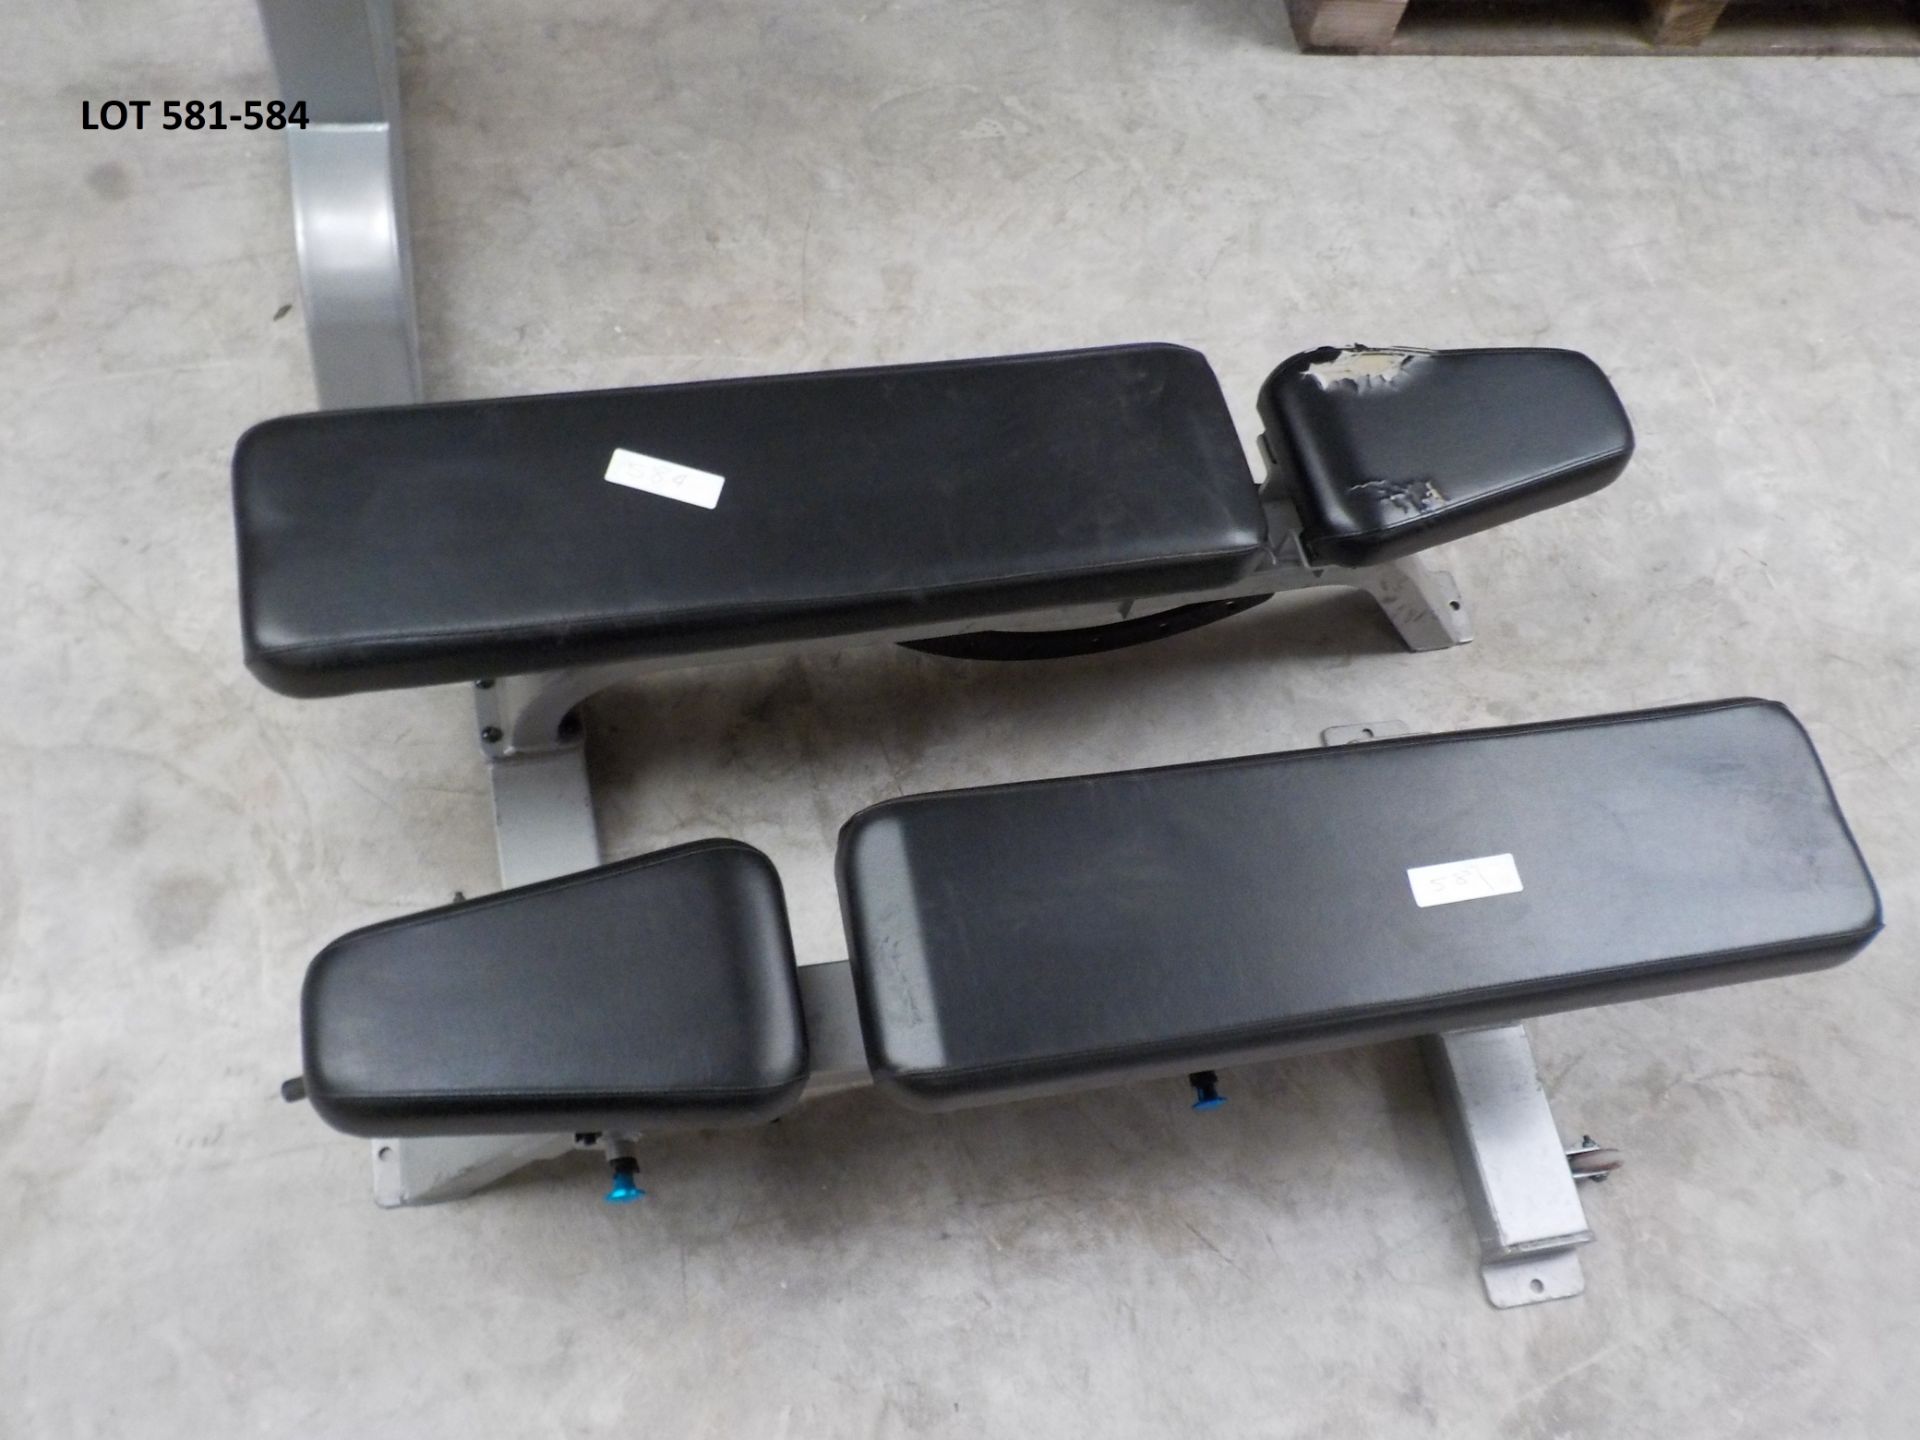 PRECOR adjustable bench - serial number BA89H24090048 (upholstery torn) *PLEASE NOTE - this lot is